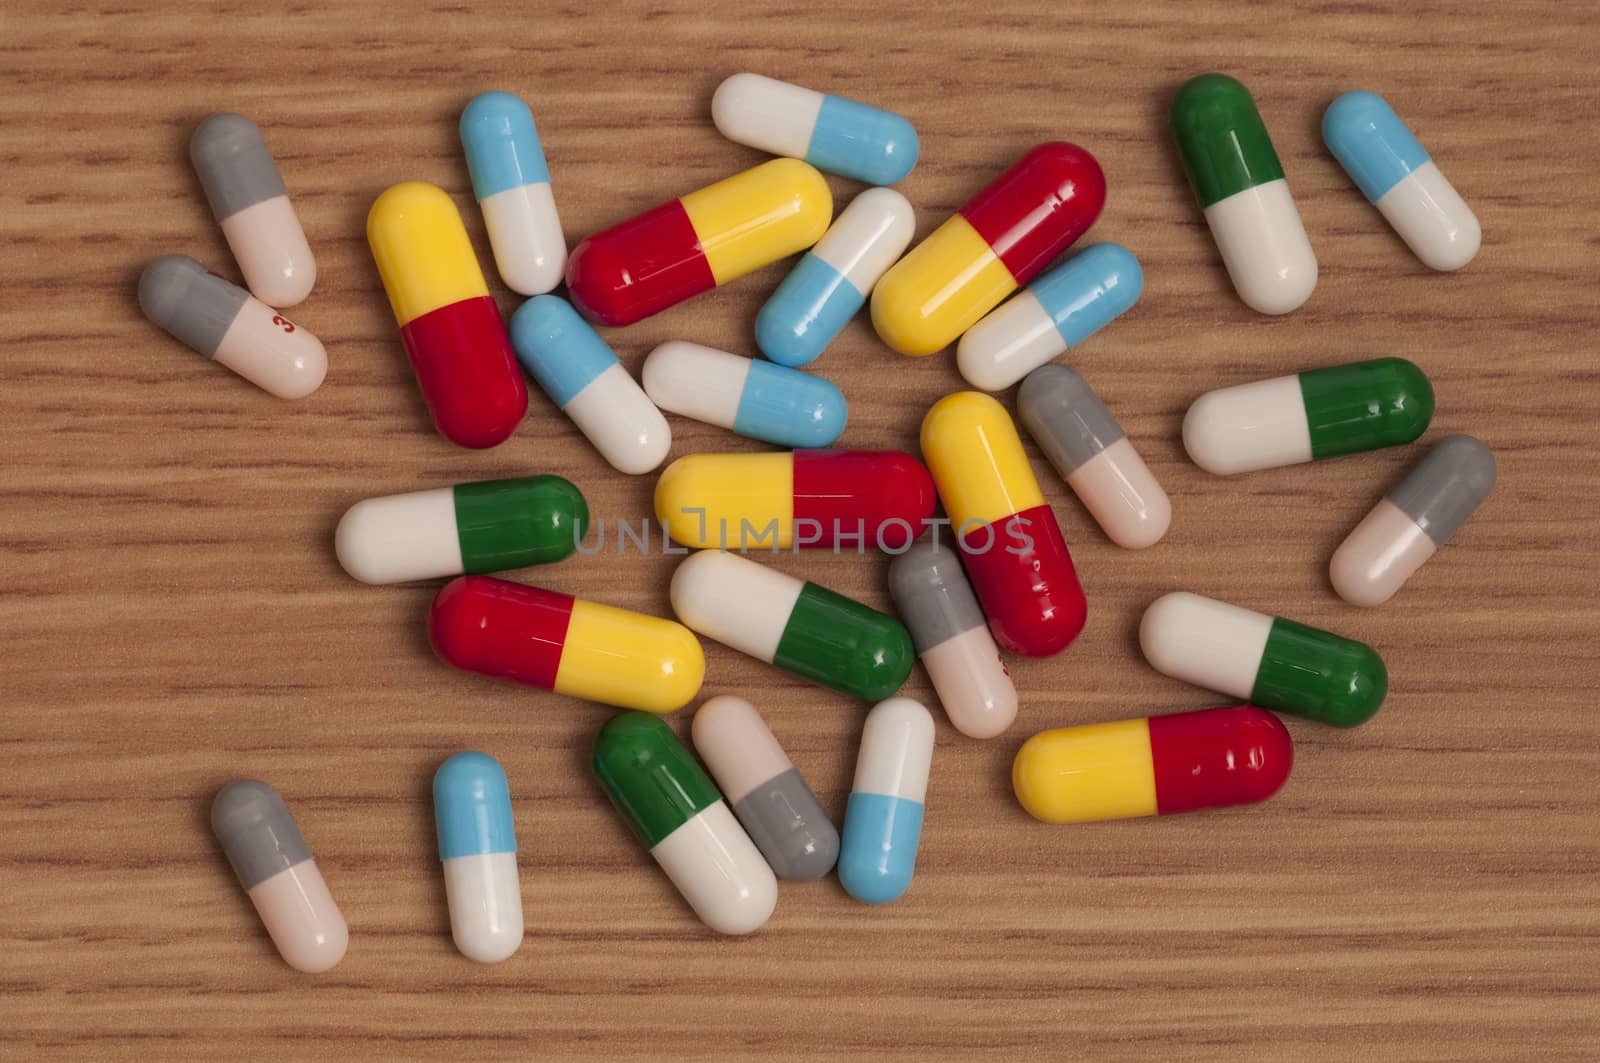 Some pills and capsules on the table